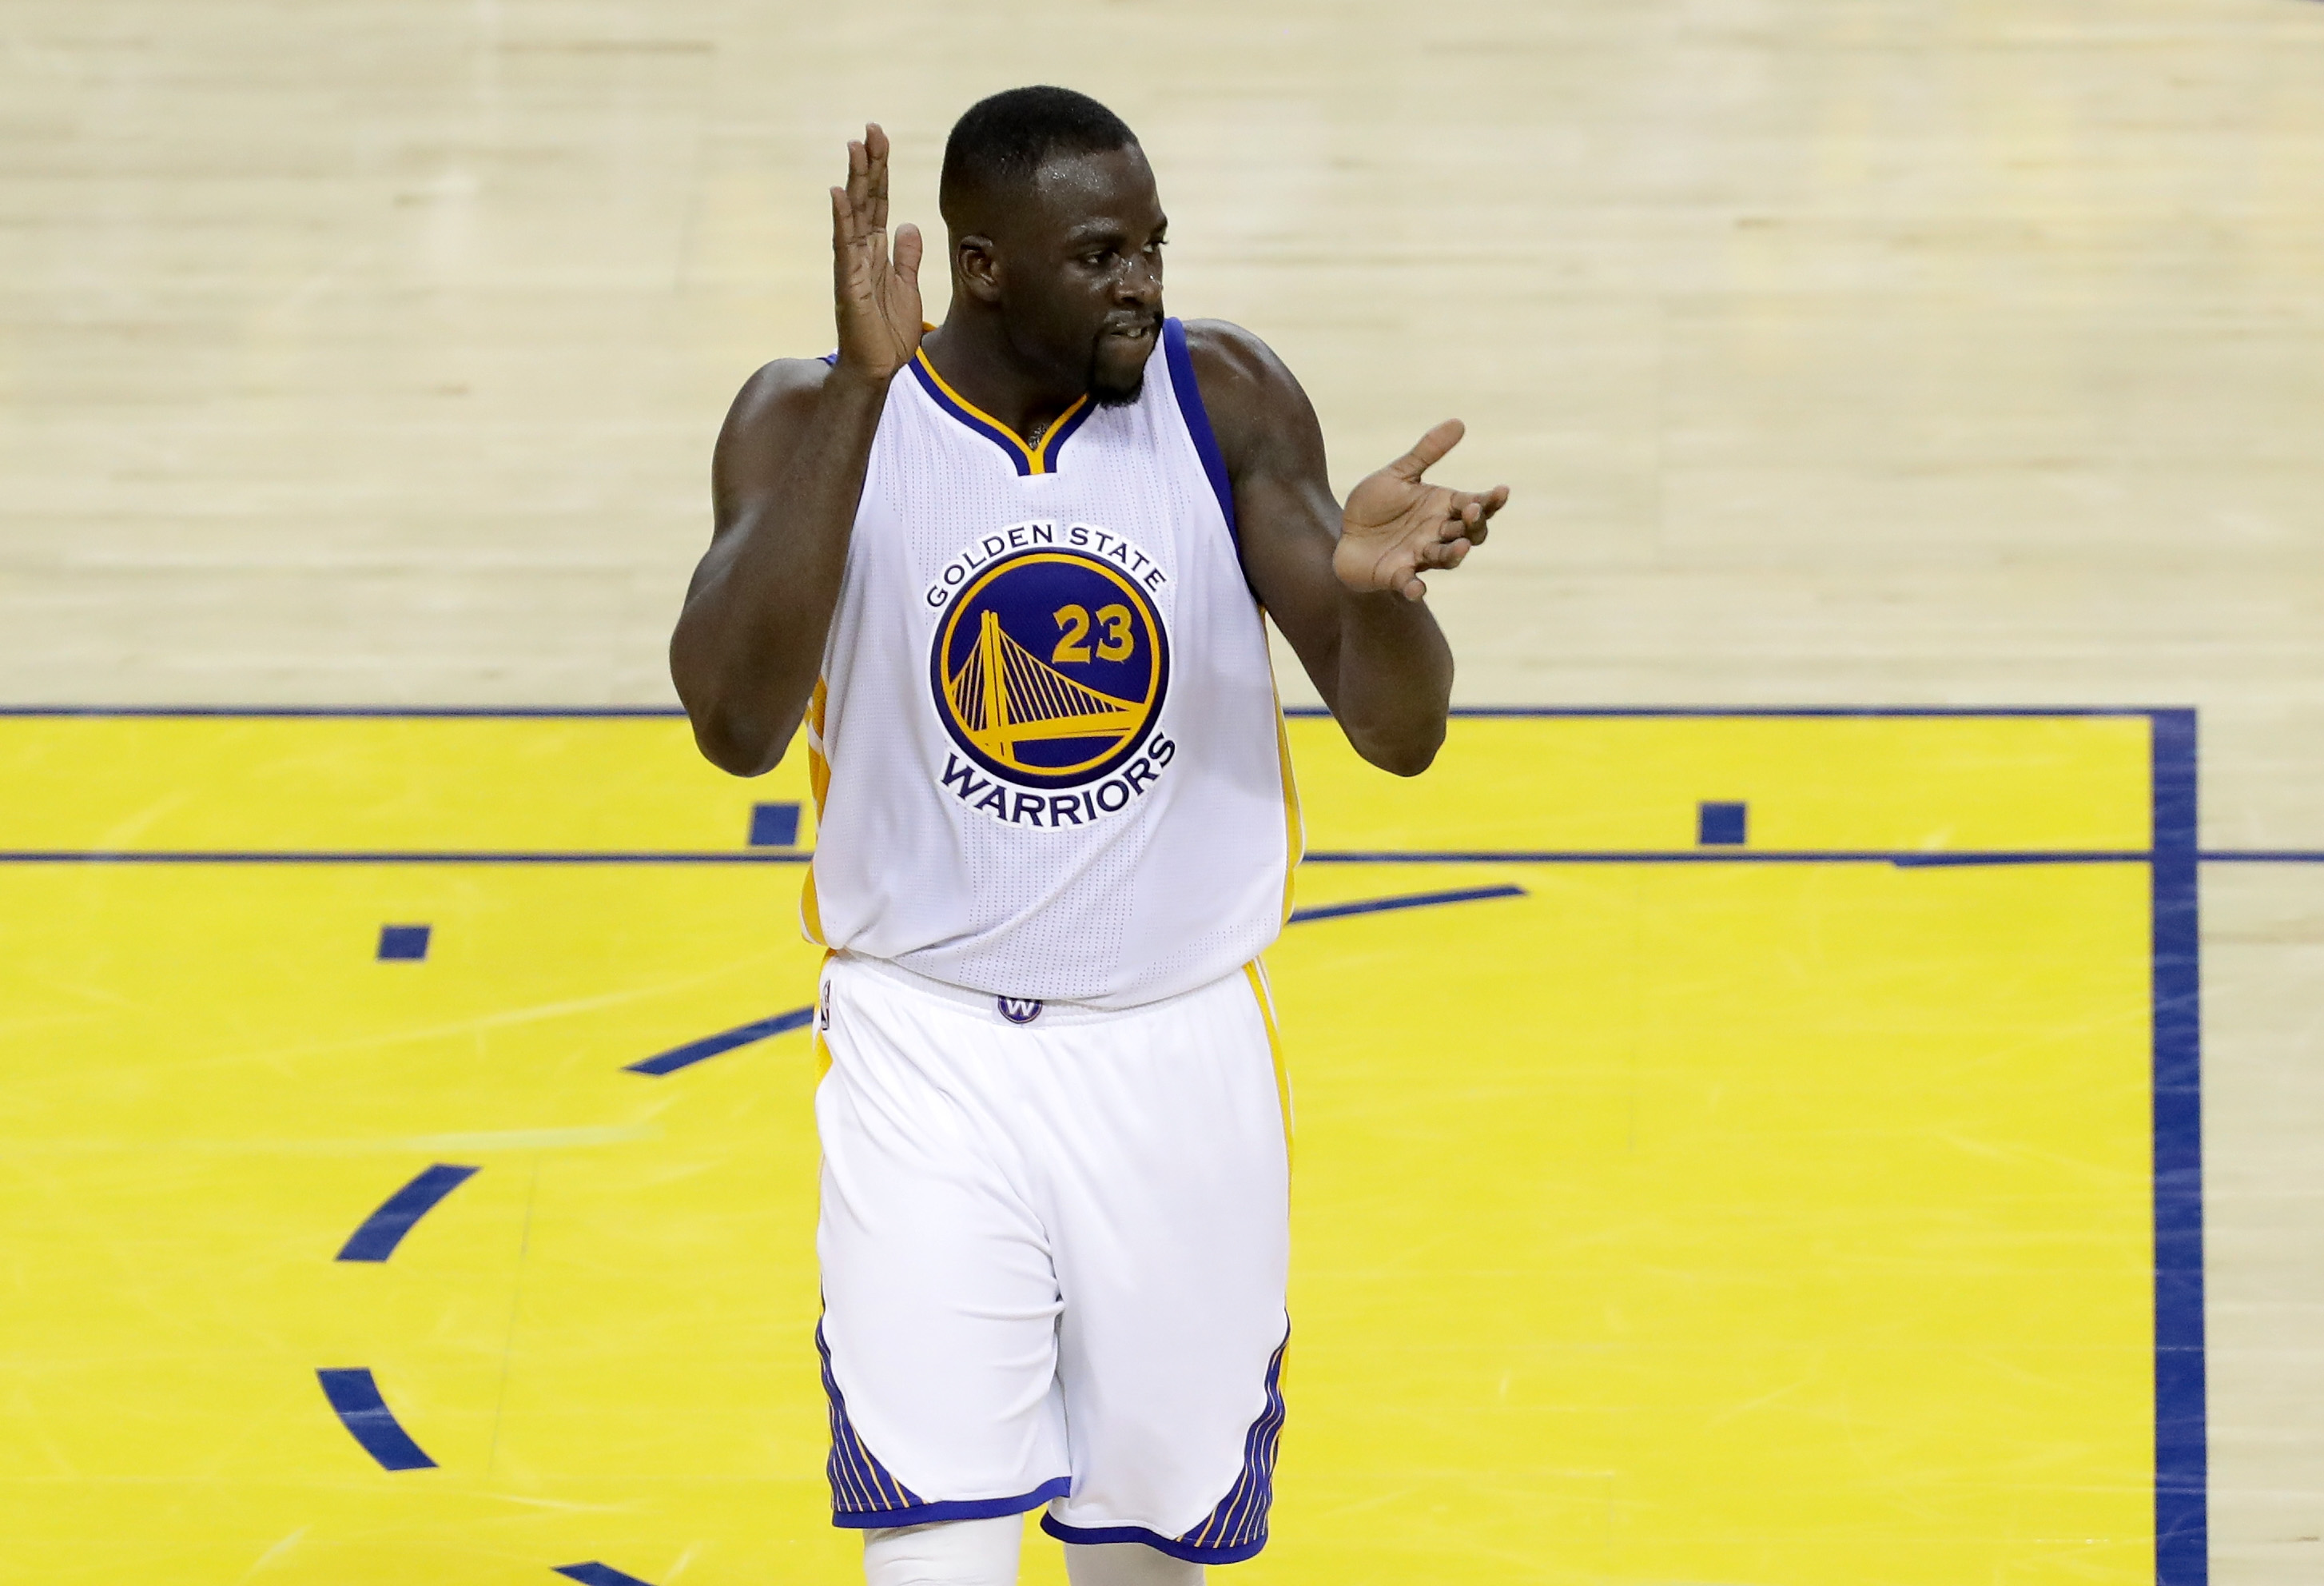 OAKLAND, CA - JUNE 05: Draymond Green #23 of the Golden State Warriors reacts during Game 2 of the 2016 NBA Finals against the Cleveland Cavaliers at ORACLE Arena on June 5, 2016 in Oakland, California. NOTE TO USER: User expressly acknowledges and agrees that, by downloading and or using this photograph, User is consenting to the terms and conditions of the Getty Images License Agreement.   Ronald Martinez/Getty Images/AFP